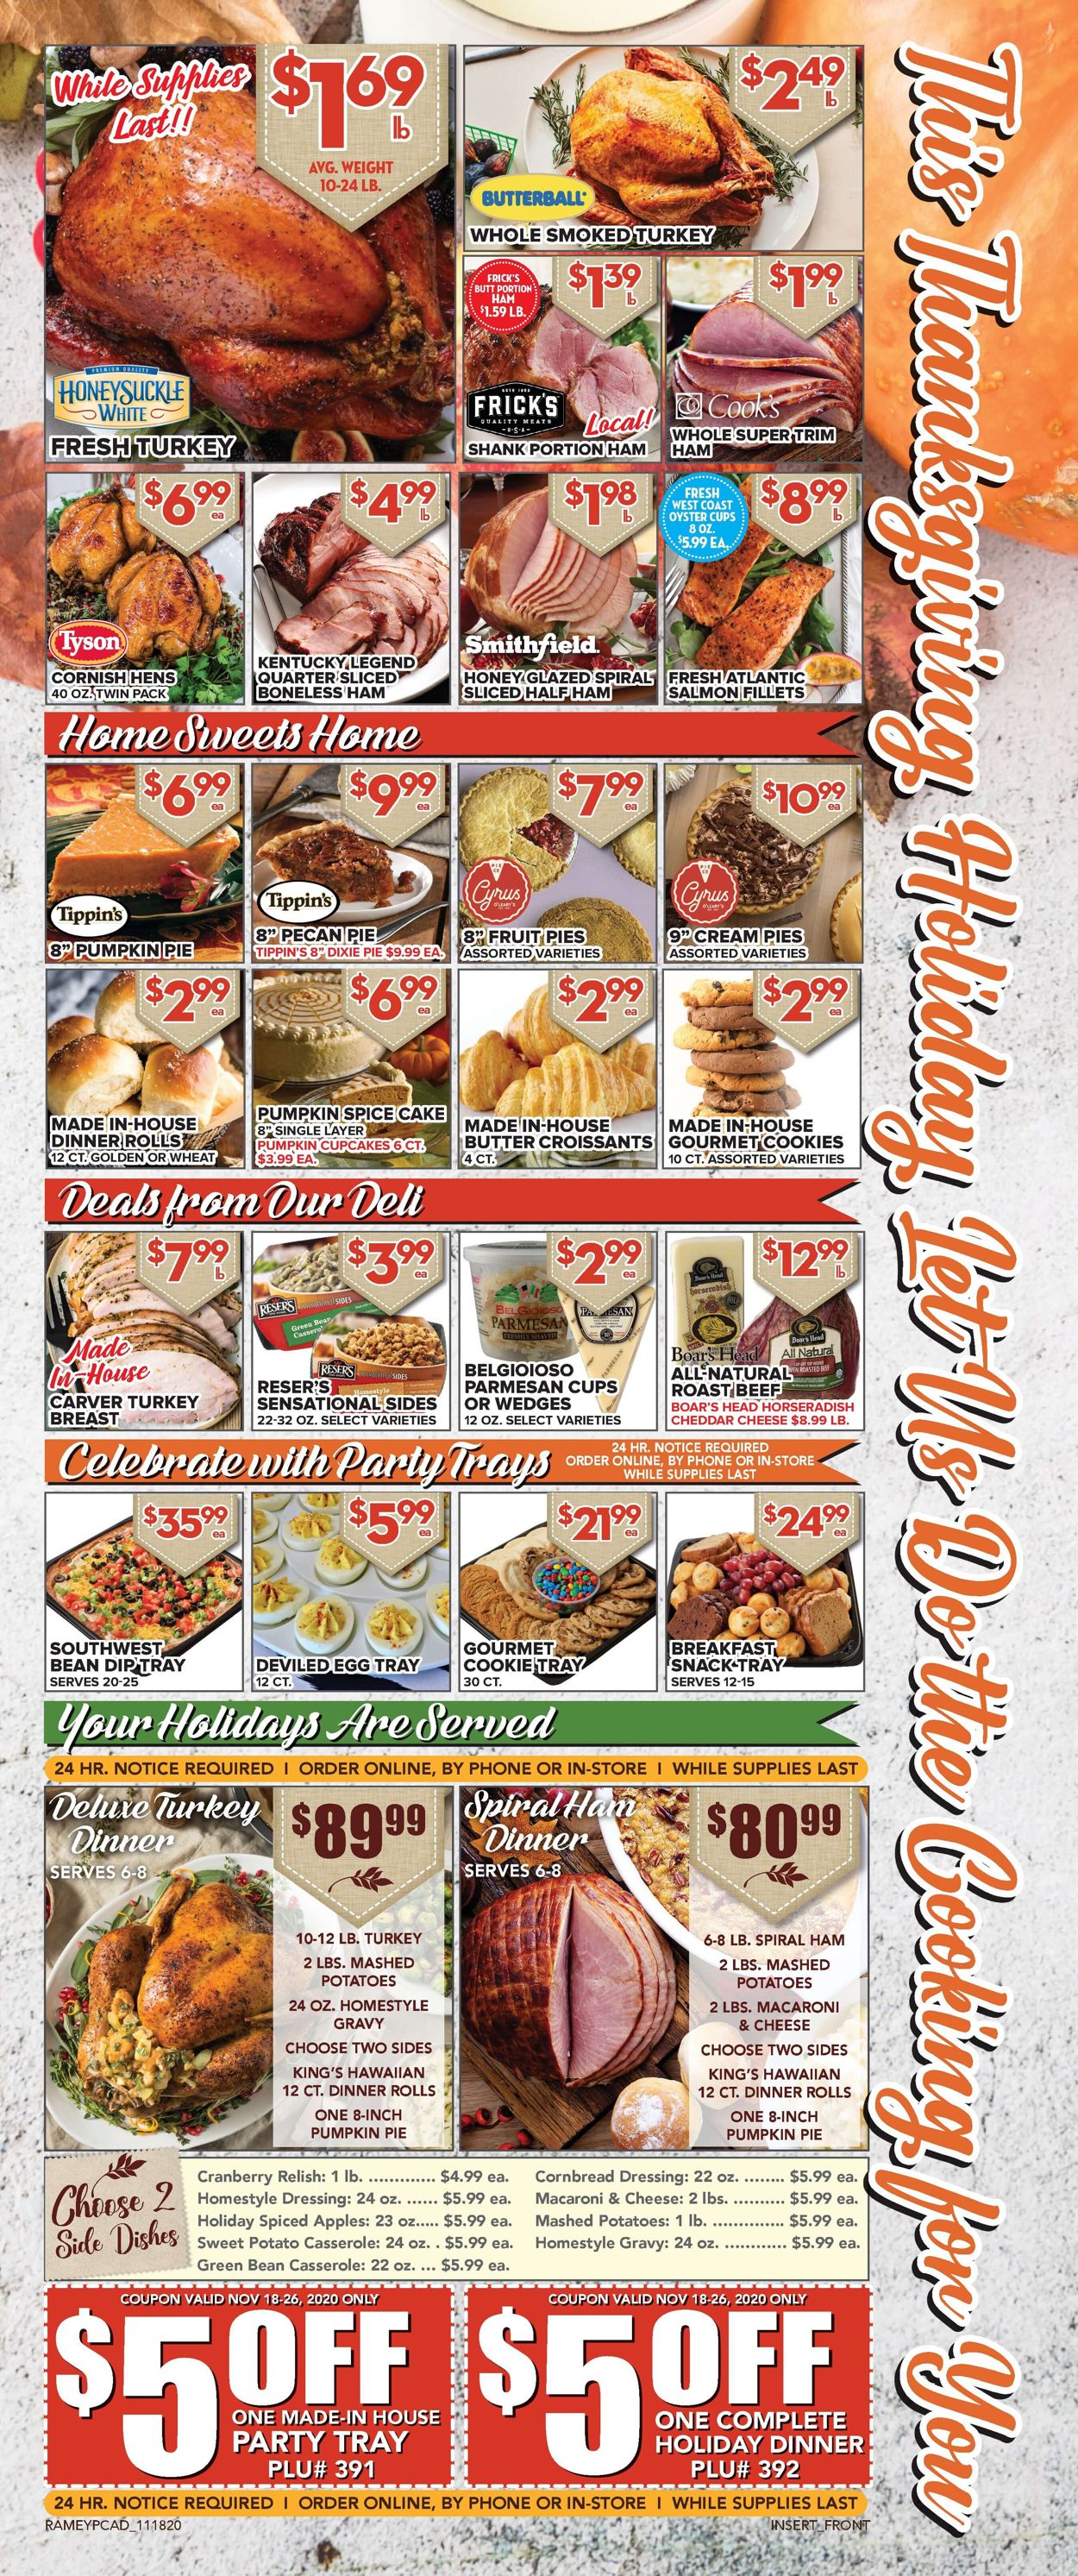 Price Cutter Thanksgiving ad 2020 Weekly Ad Circular - valid 11/18-11/26/2020 (Page 5)